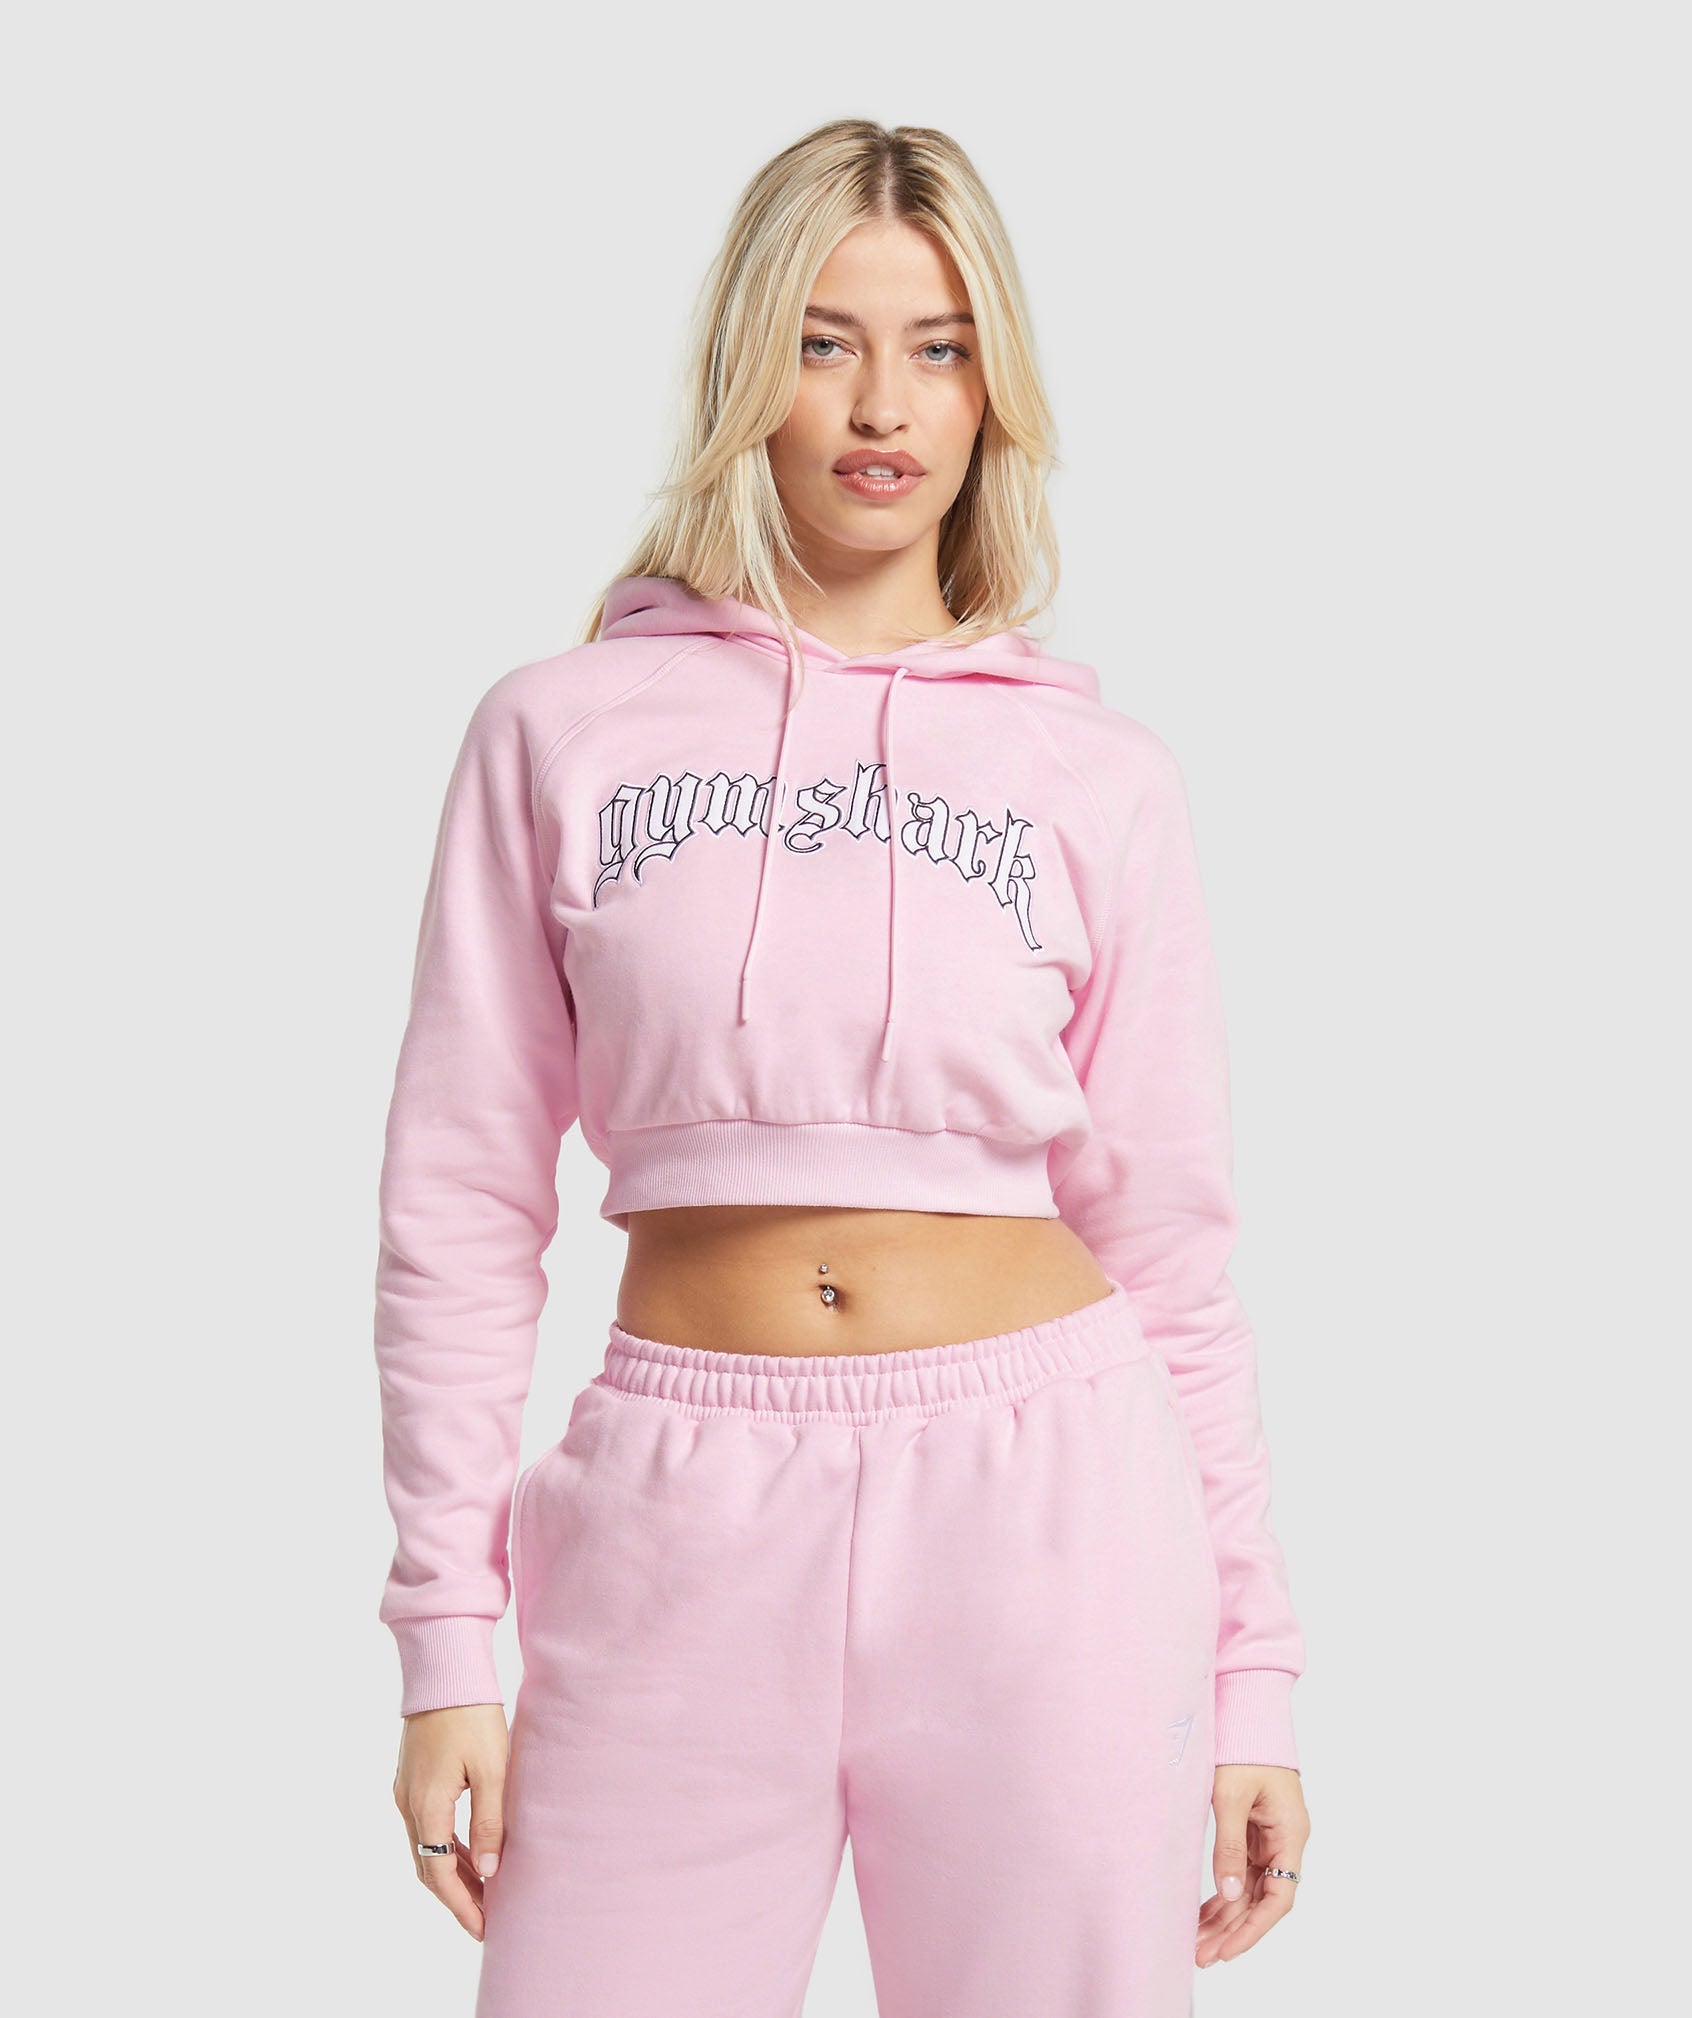 Heavy Flex Cropped Hoodie in Dolly Pink - view 1